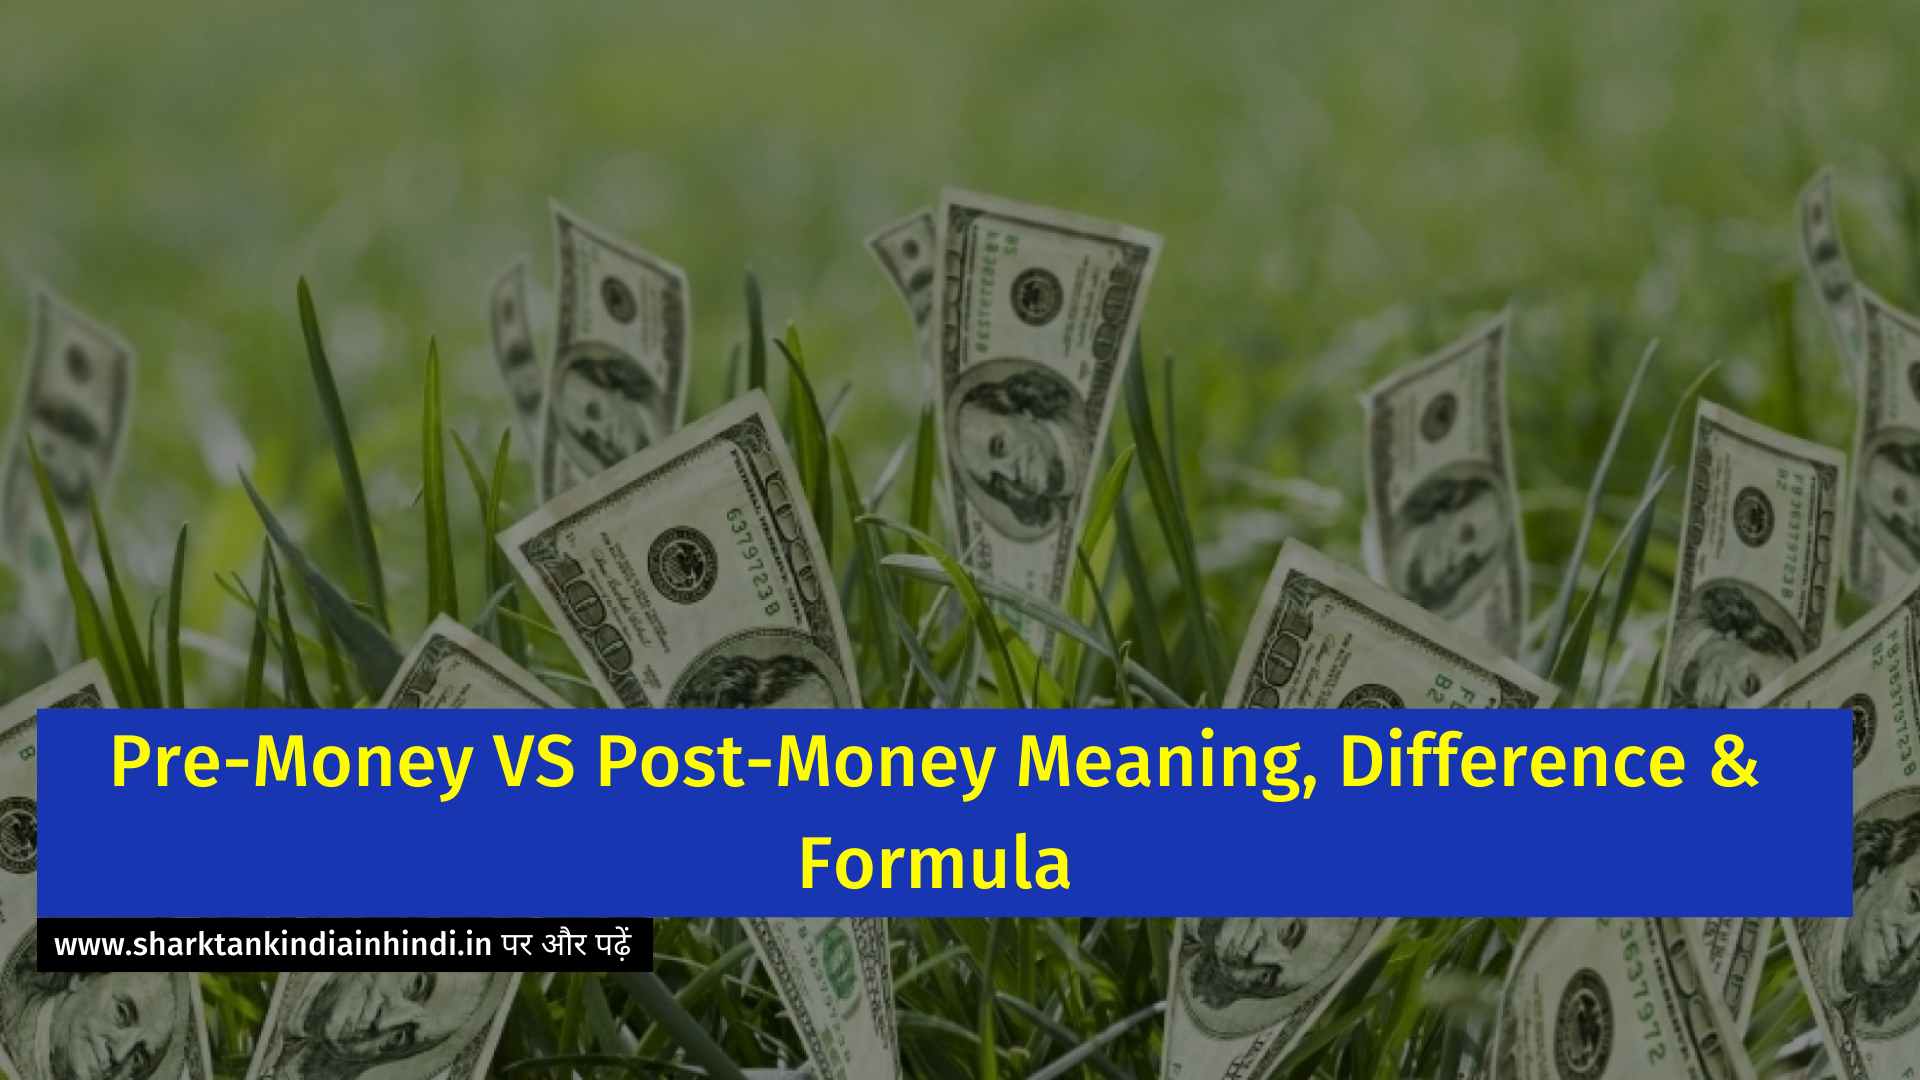 Pre-Money VS Post-Money Meaning, Difference & Formula